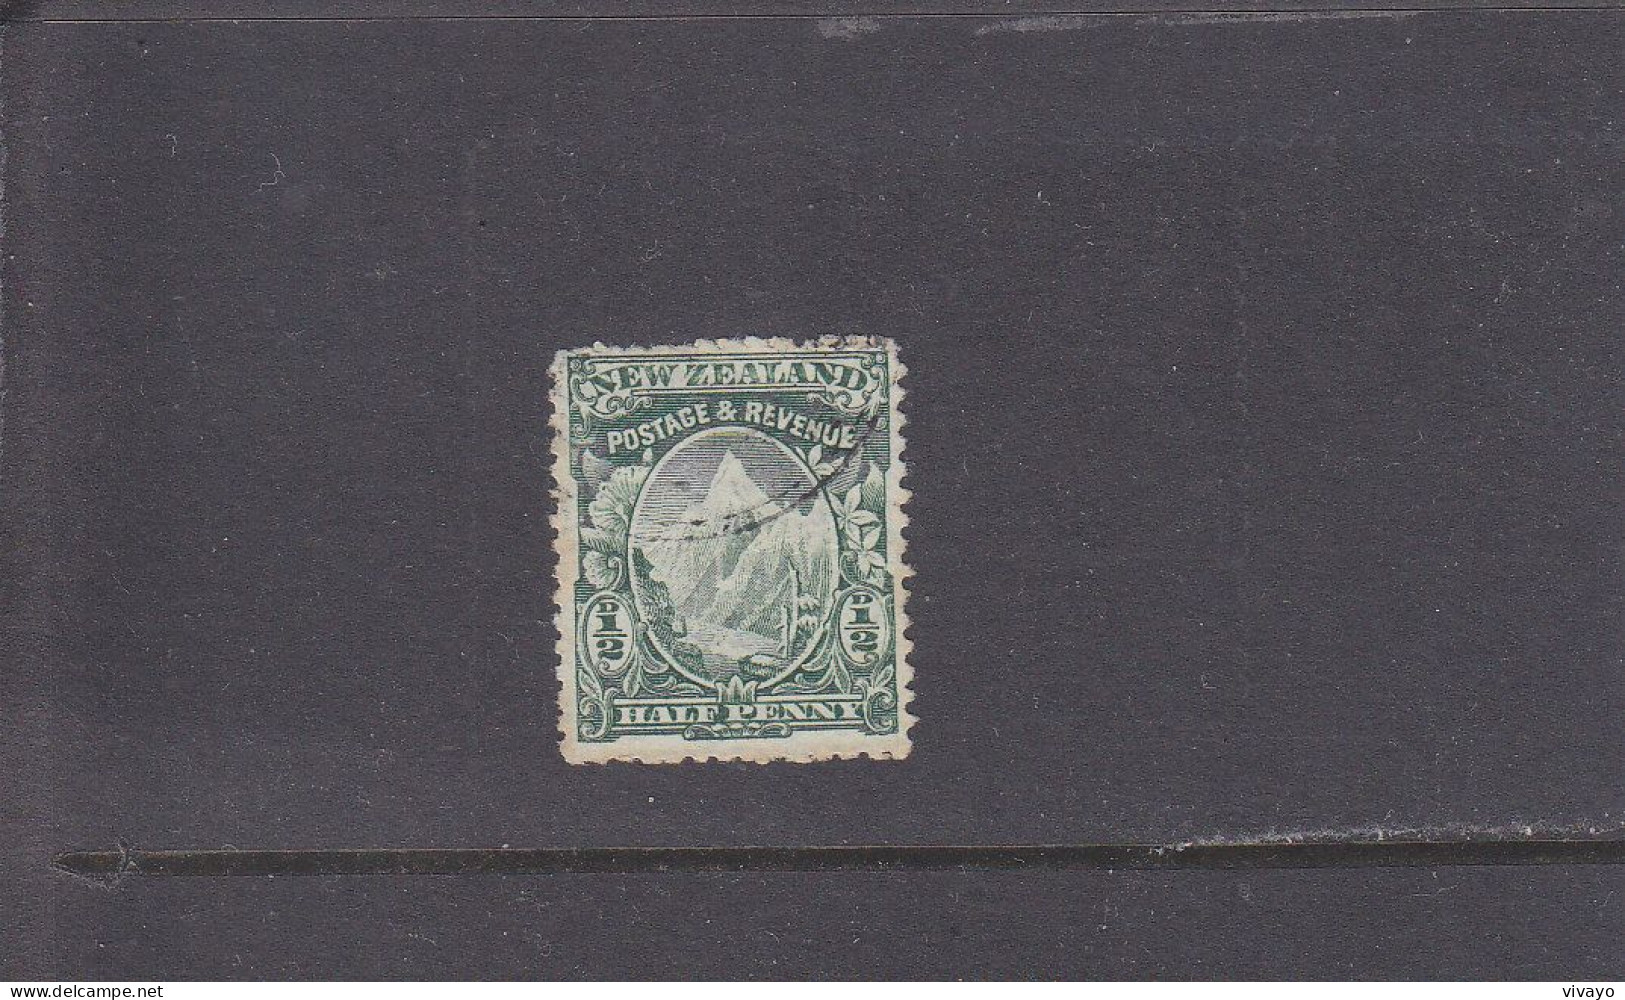 NEW ZEALAND - O / FINE CANCELLED - 1909 - MOUNT COOK - Yv. 133 - Mi. 122 - Used Stamps